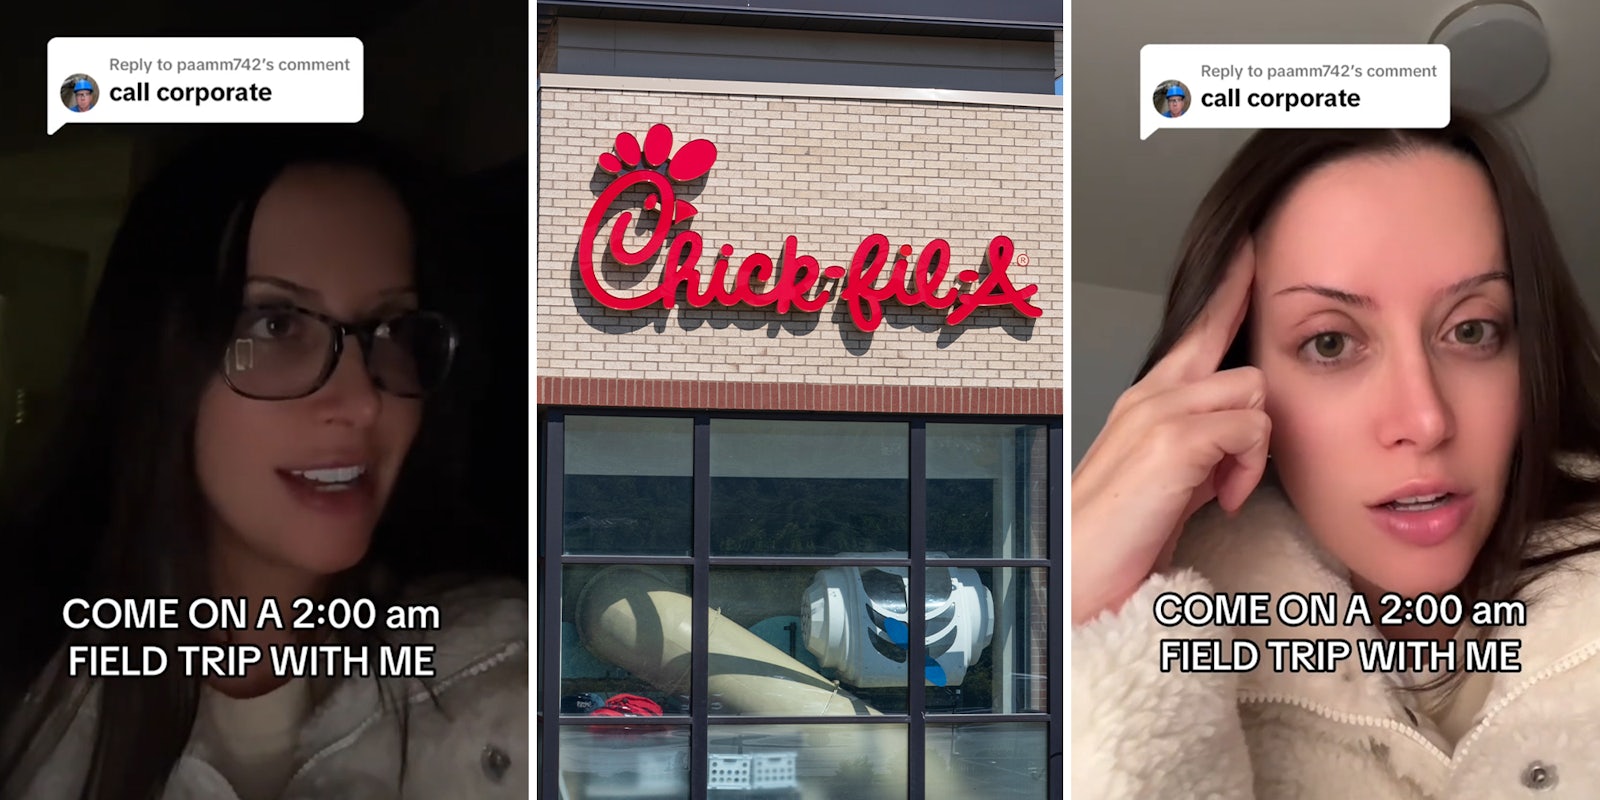 Woman calls out Chick-fil-A for blasting music at 2am. She can hear it 4 lanes away